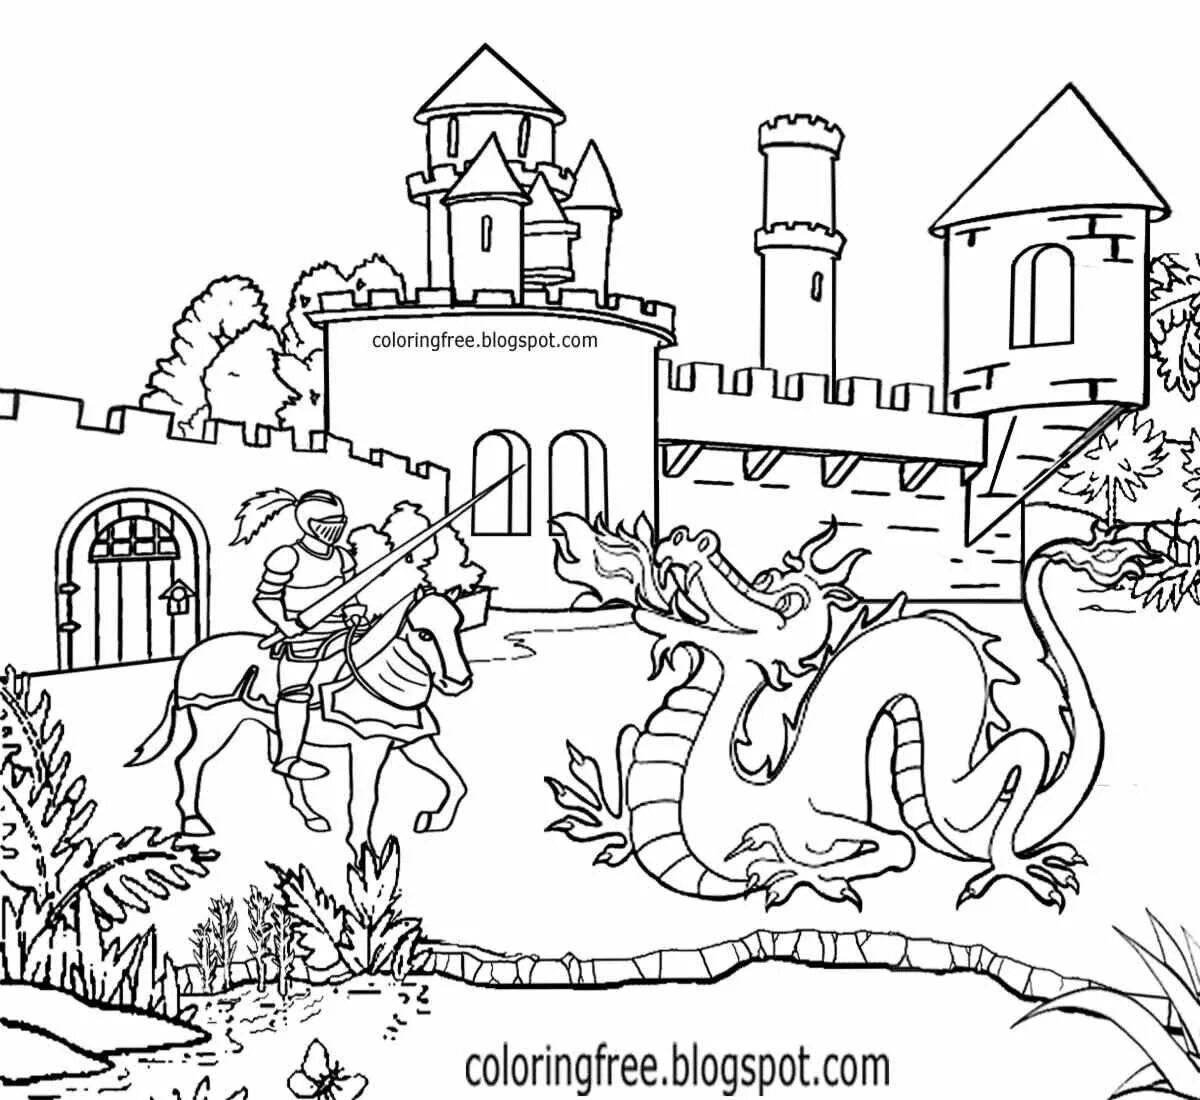 Coloring page amazing knight's castle